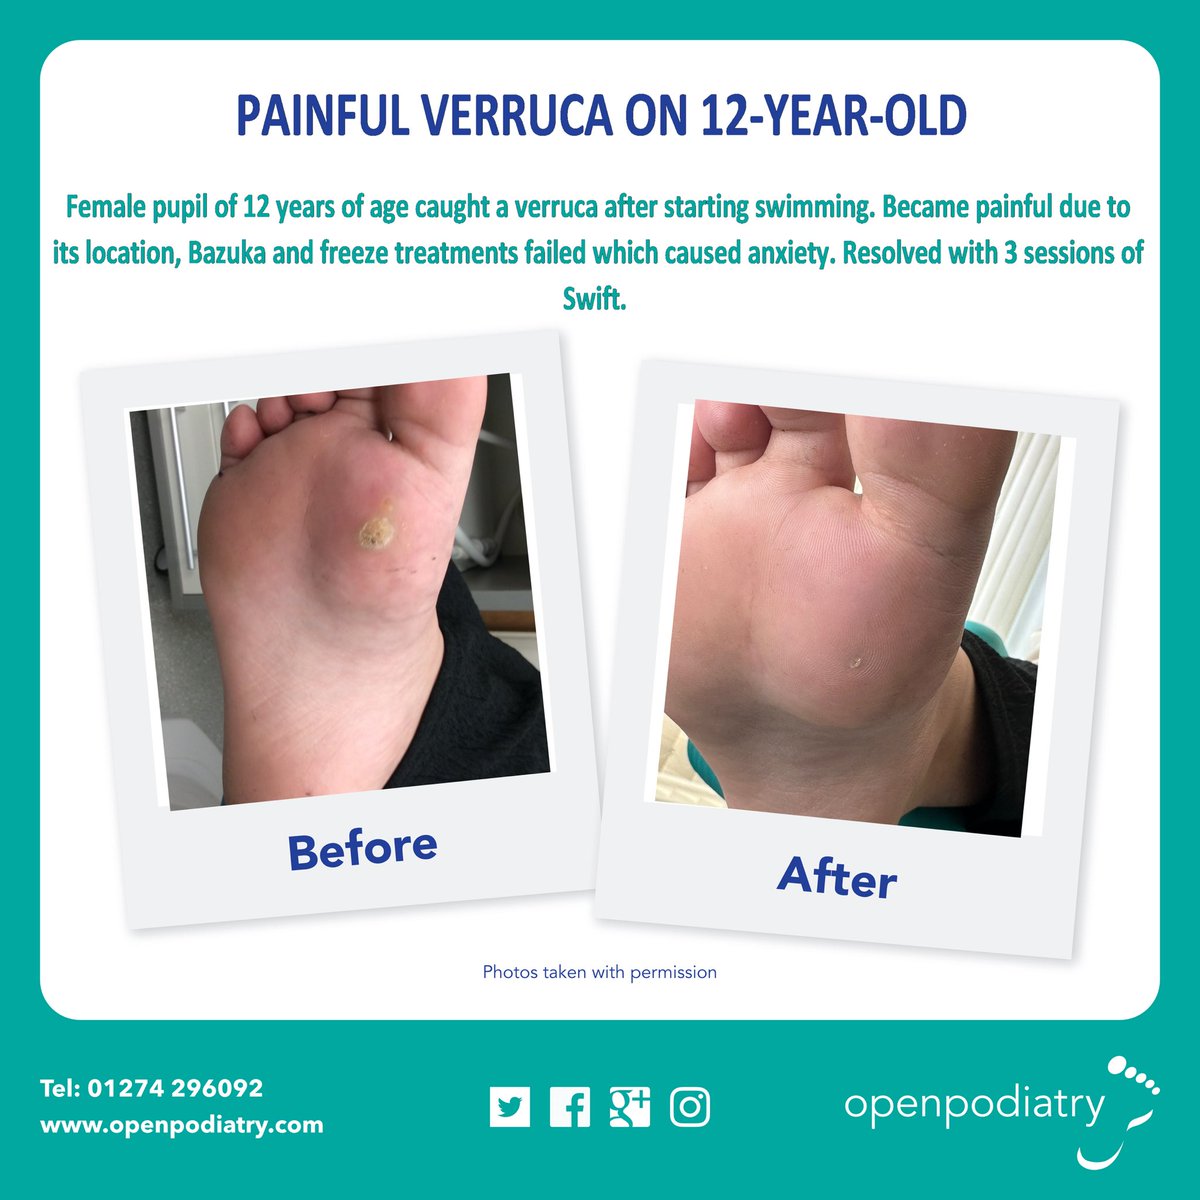 Check out these 3 recent success stories with fantastic results against verrucas using Swift. 
Contact us .

@swift_treatment 

#Podiatry #feet #Bradford #footpain #verruca  #openpodiatry #nails #wartremoval #treatedverruca #swifttreatment #verrucatreatment #bradfordpodiatrist